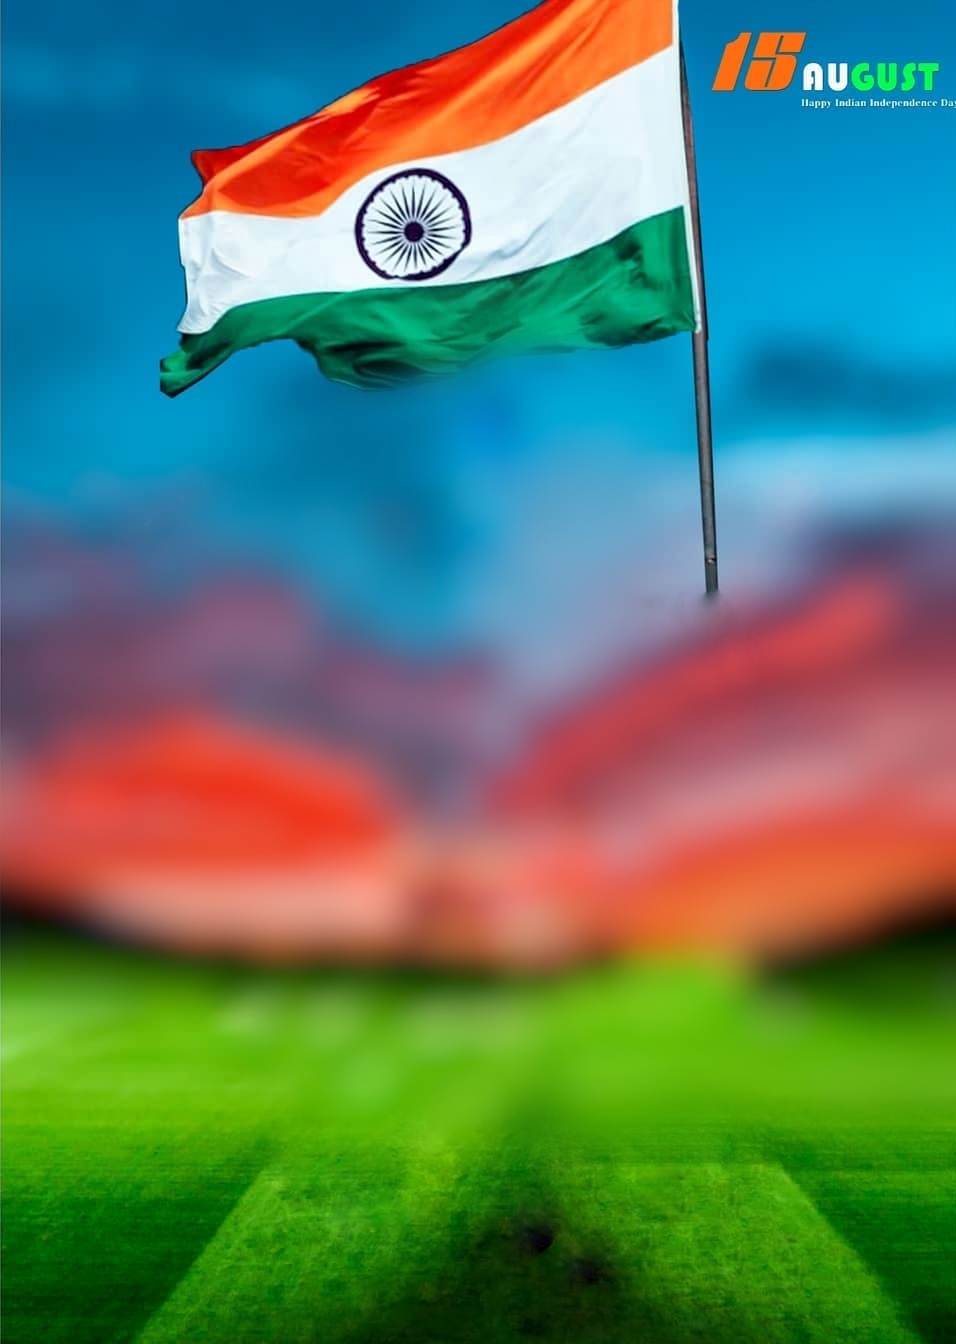 India Flag Background For 15 August Photo Editing